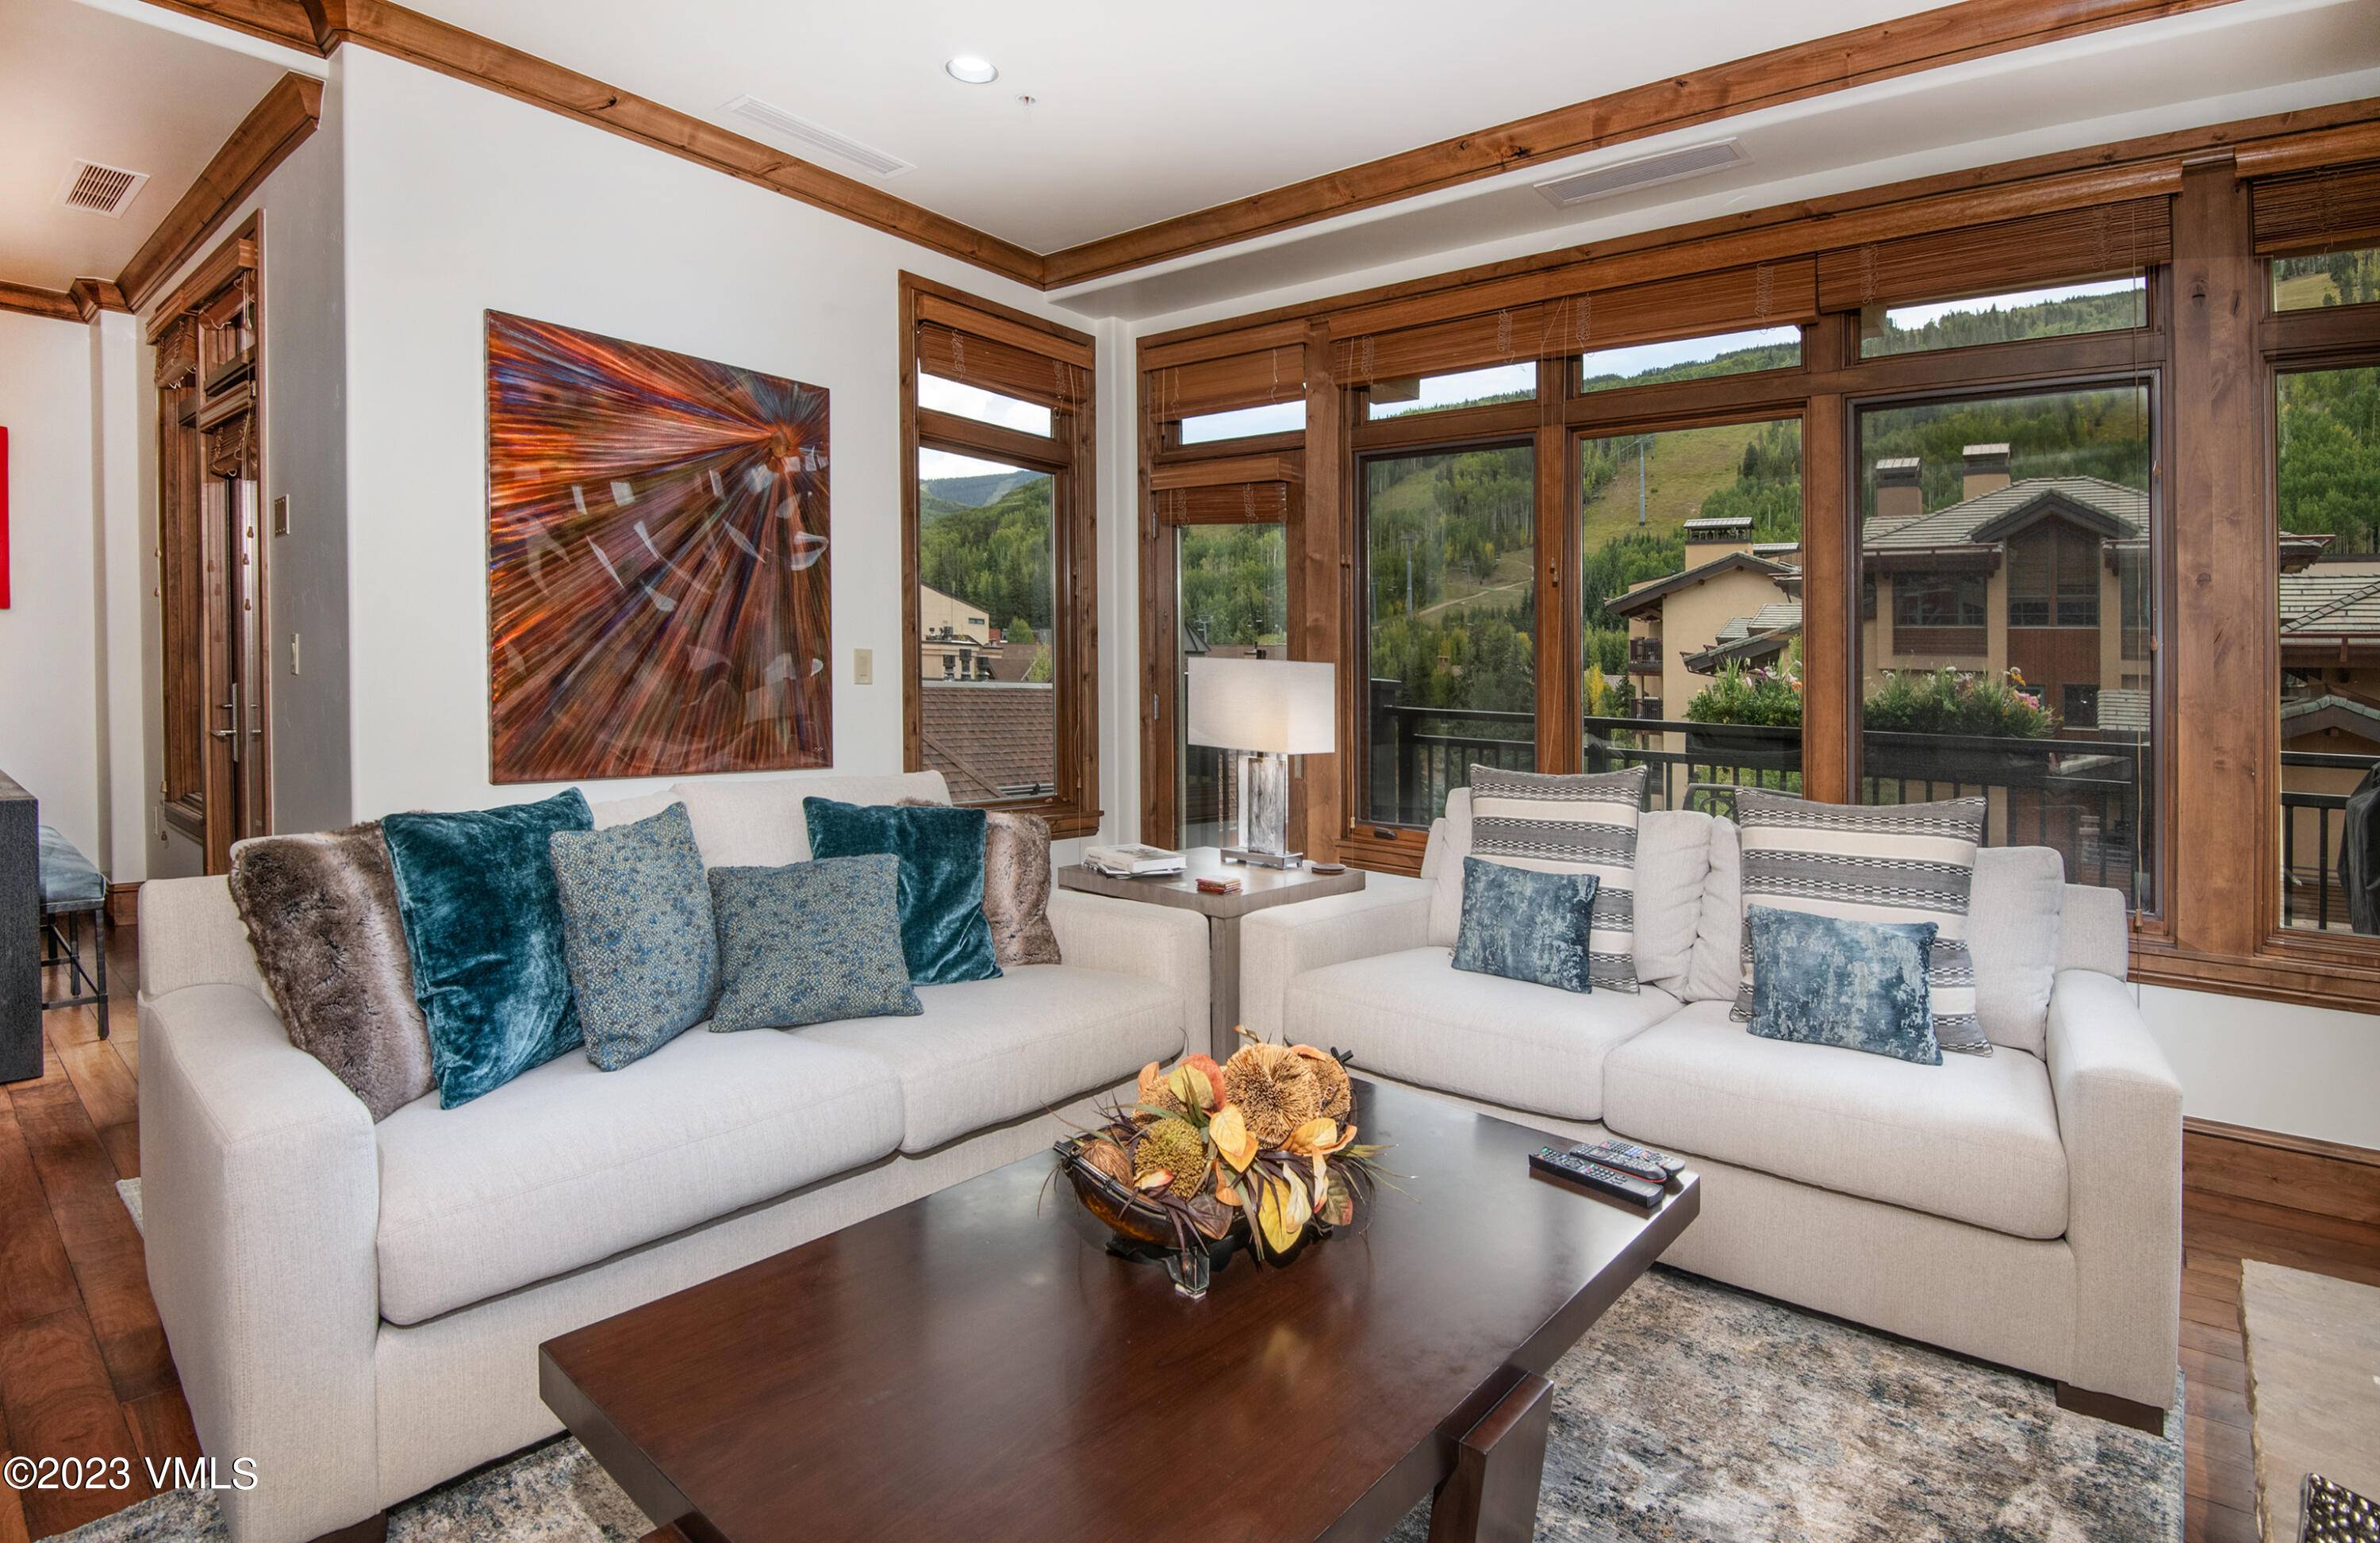 Tower above Vail at this luxurious and prime Lionshead location.